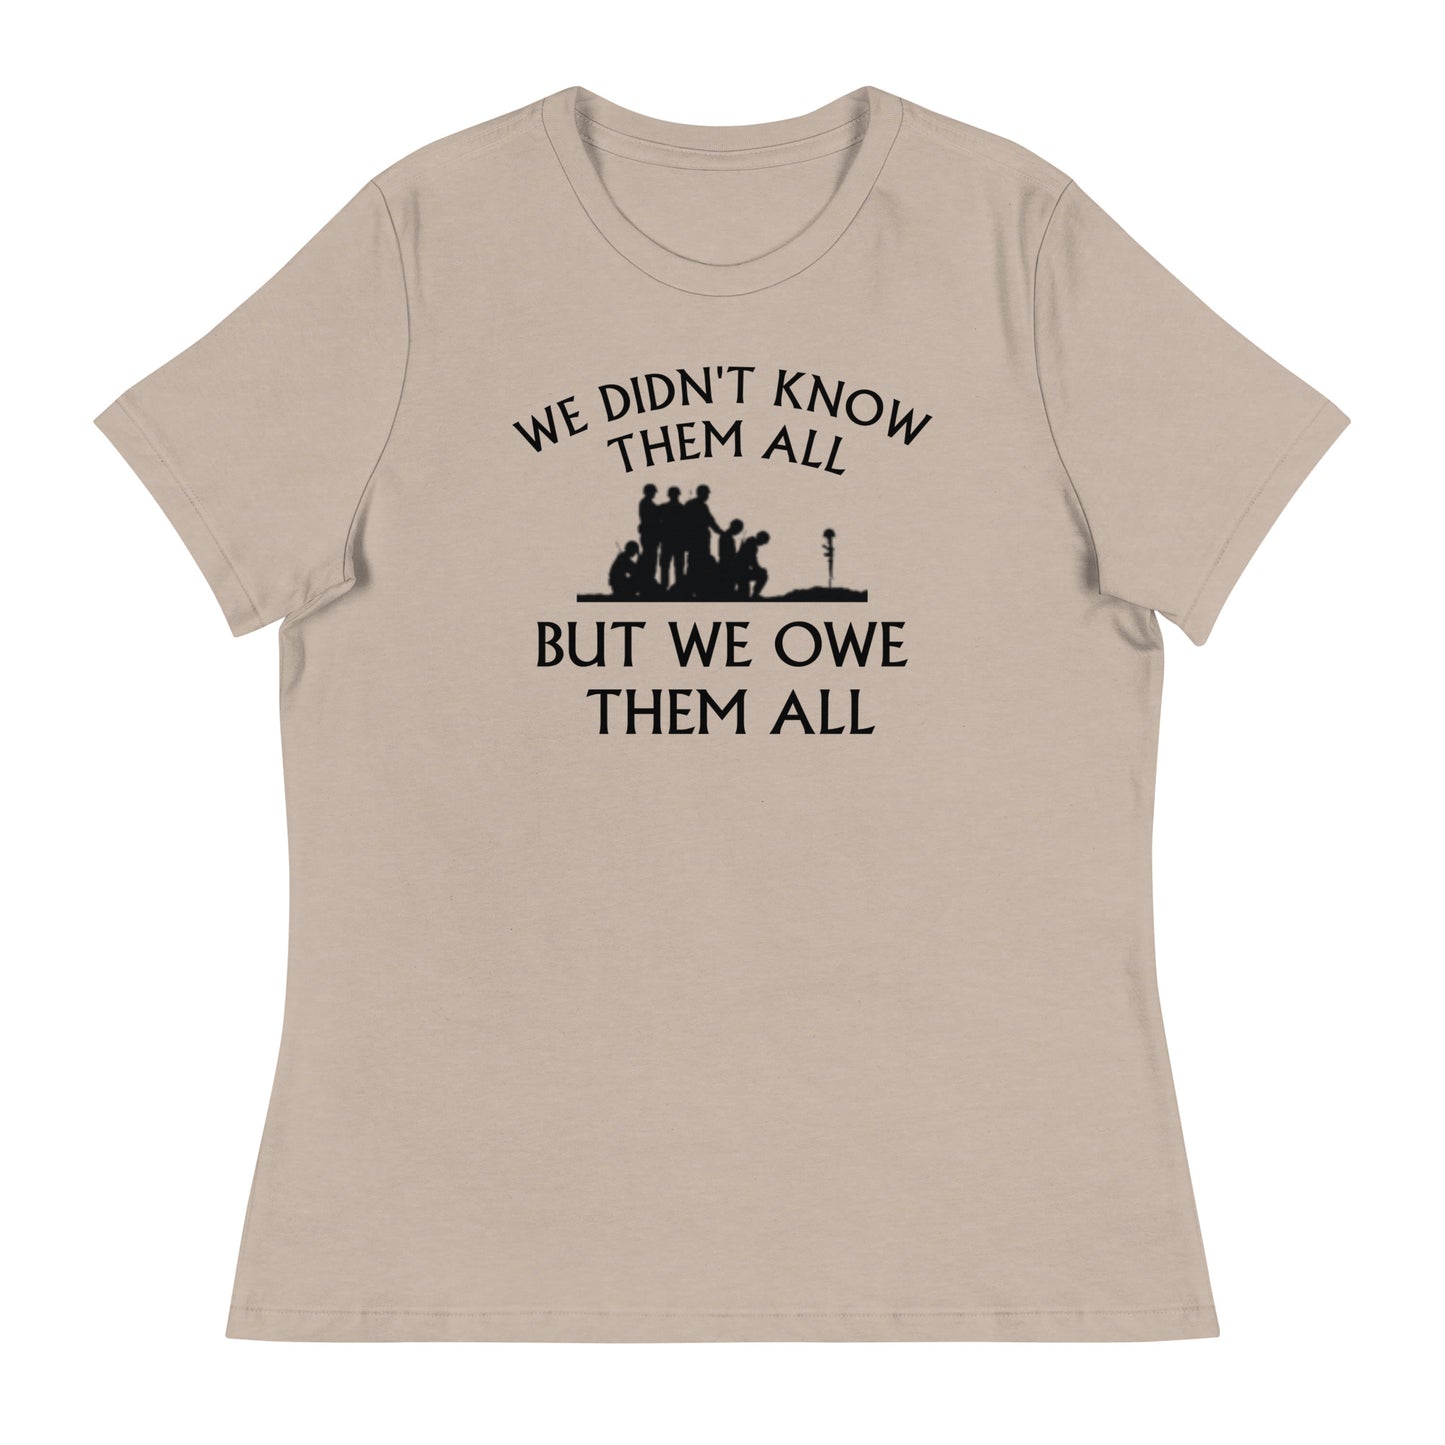 We didn't know them all but we owe them all women's tee